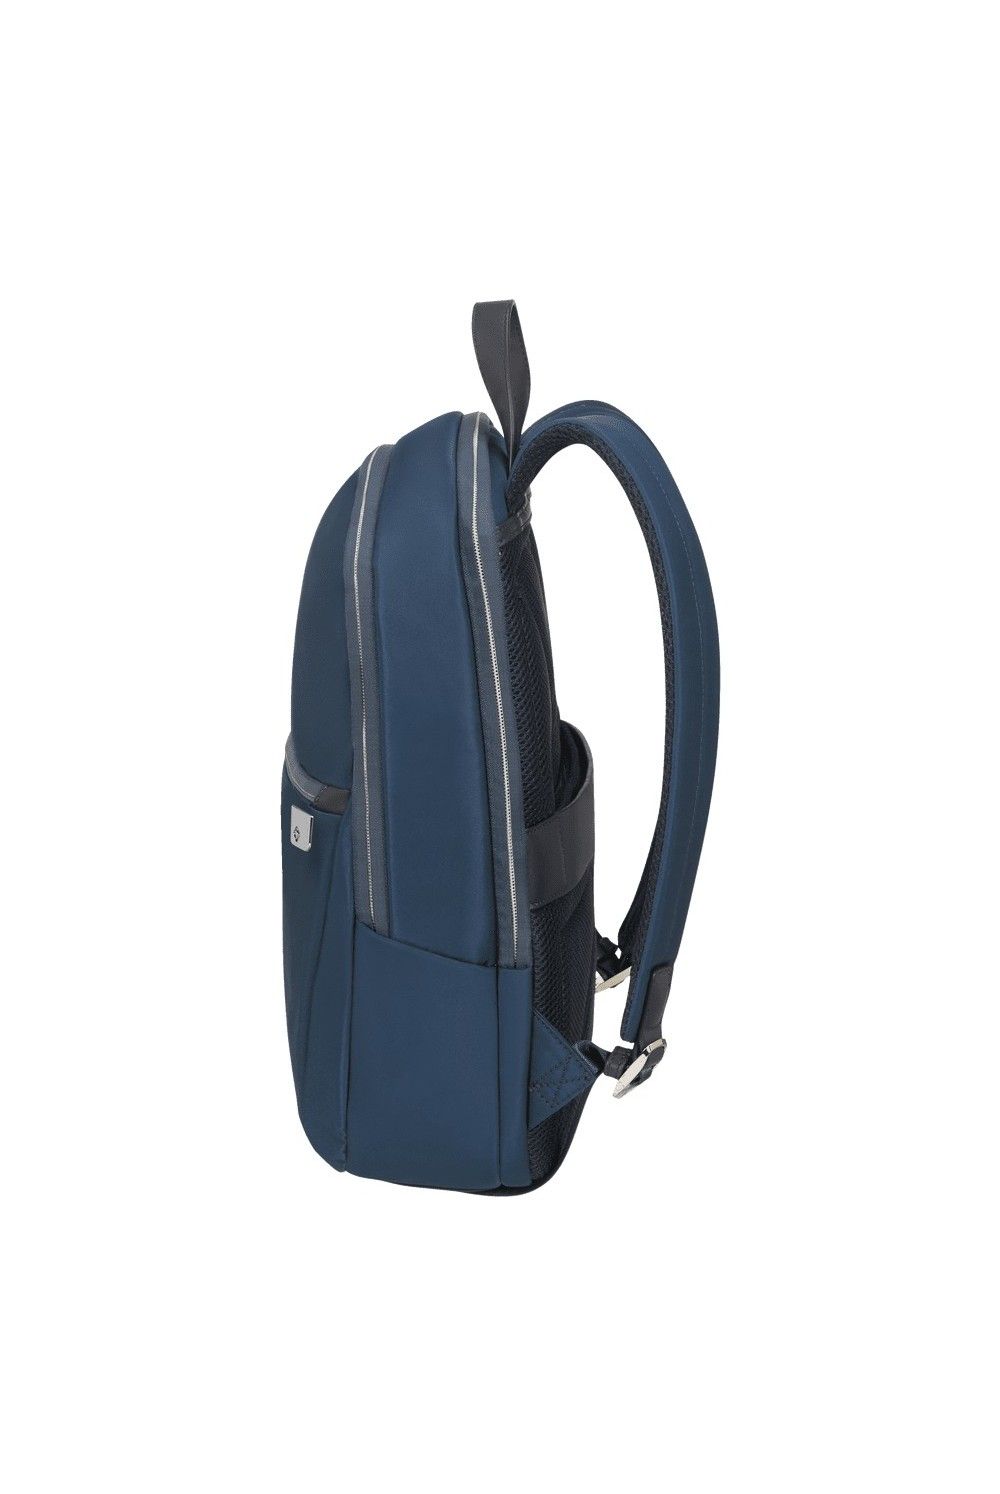 Laptop backpack Samsonite Eco Wave 14.1 inches